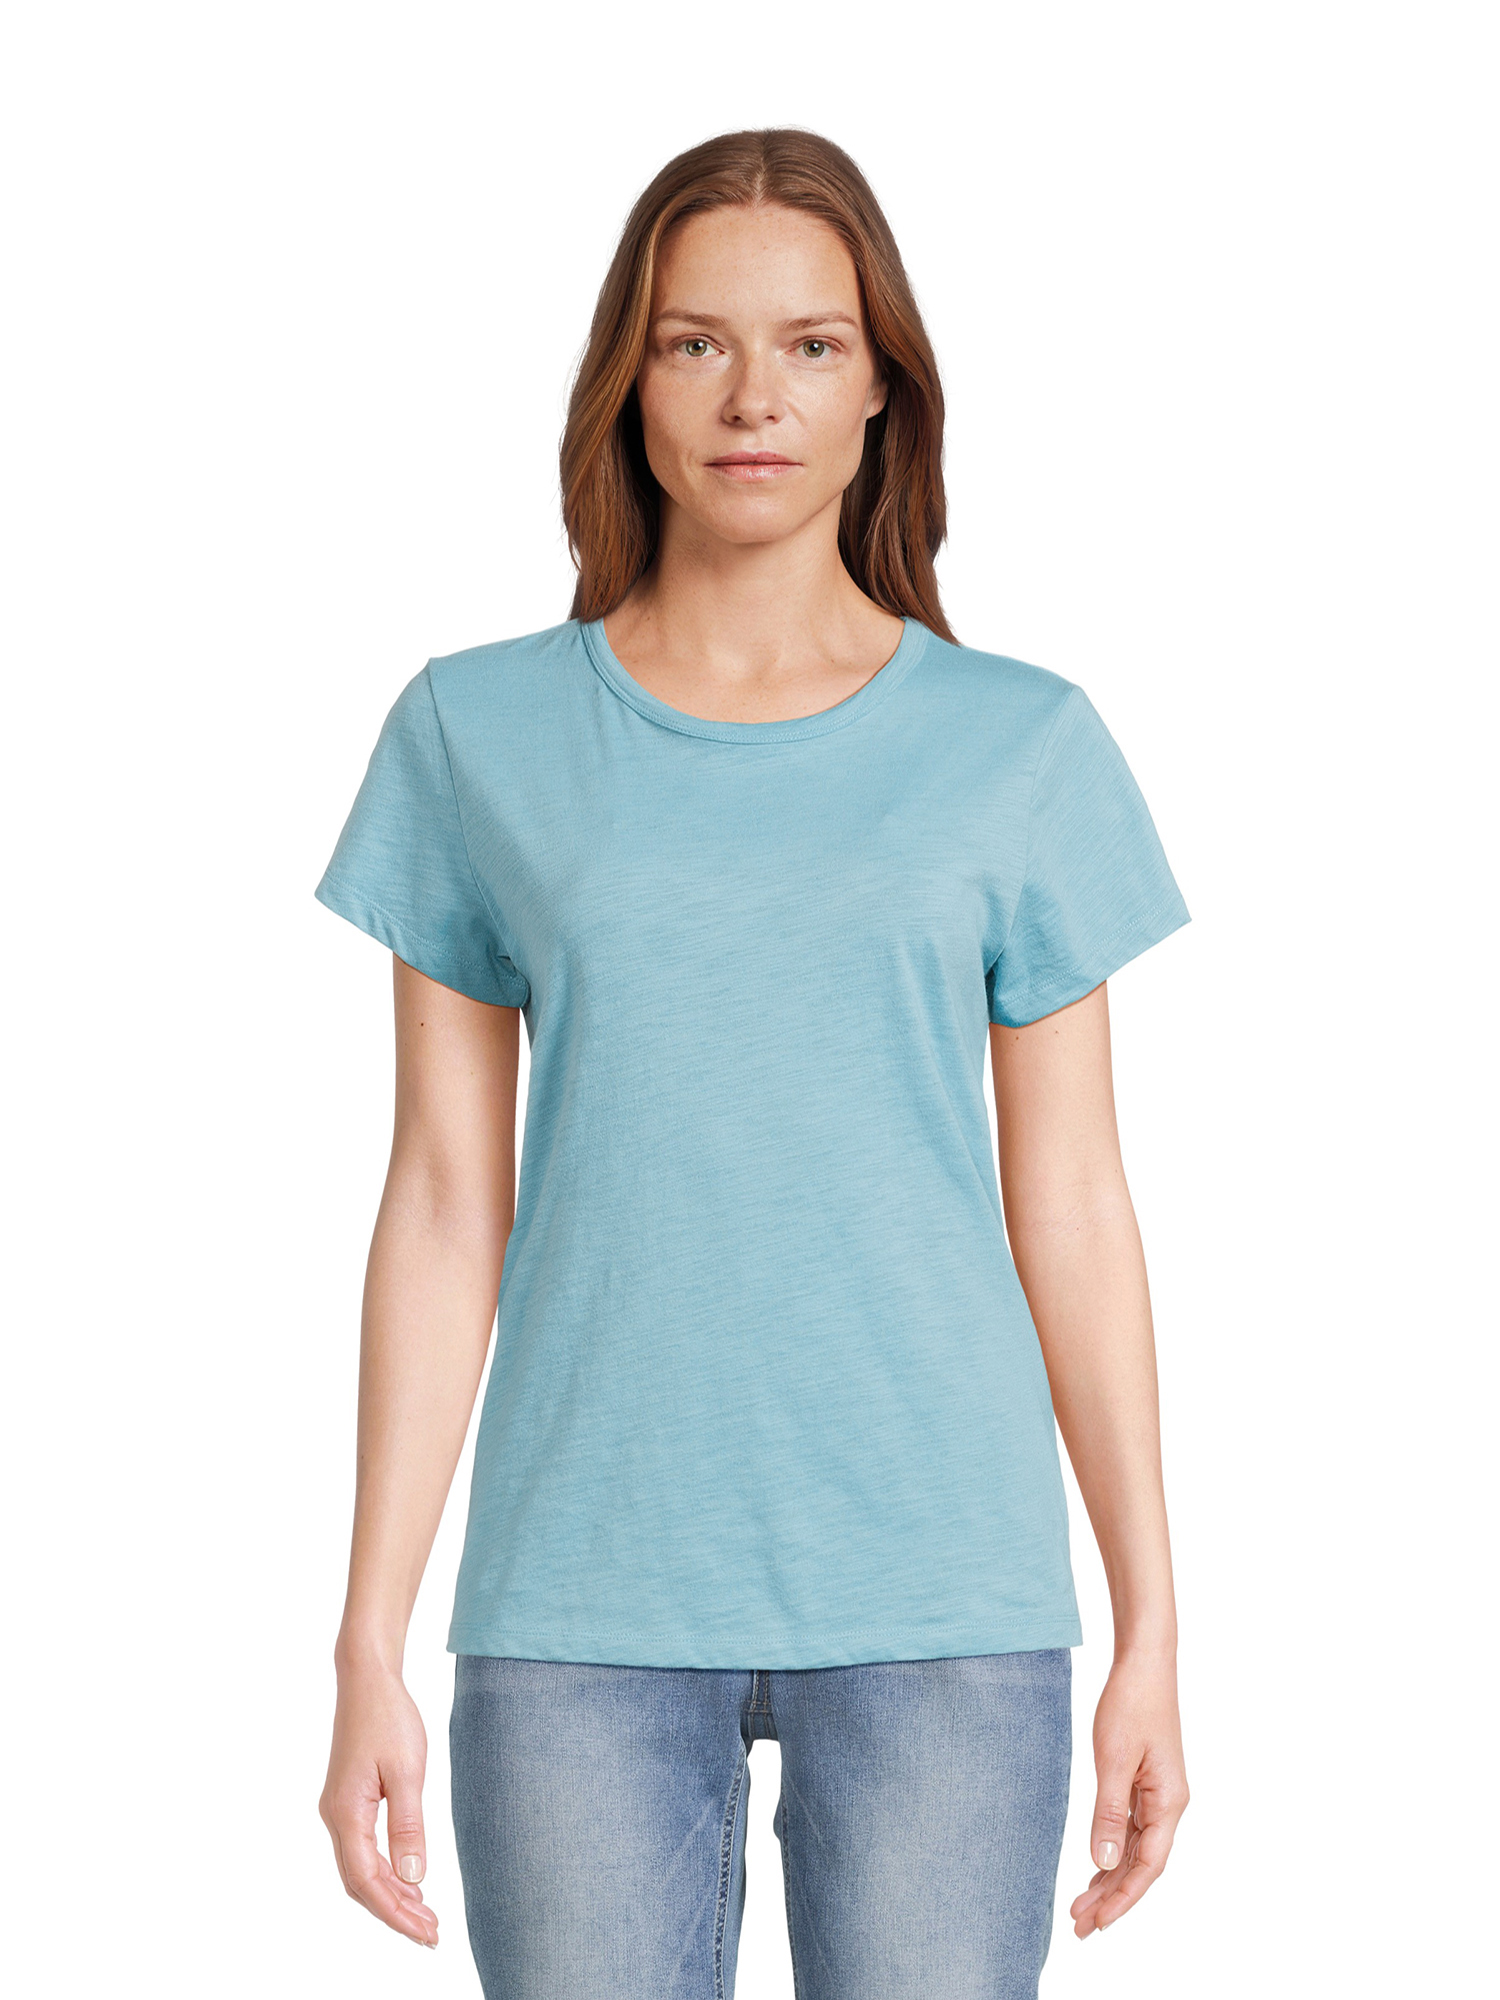 Time and Tru Women's Slub Texture Tee with Short Sleeves, Sizes S-XXXL - image 1 of 6